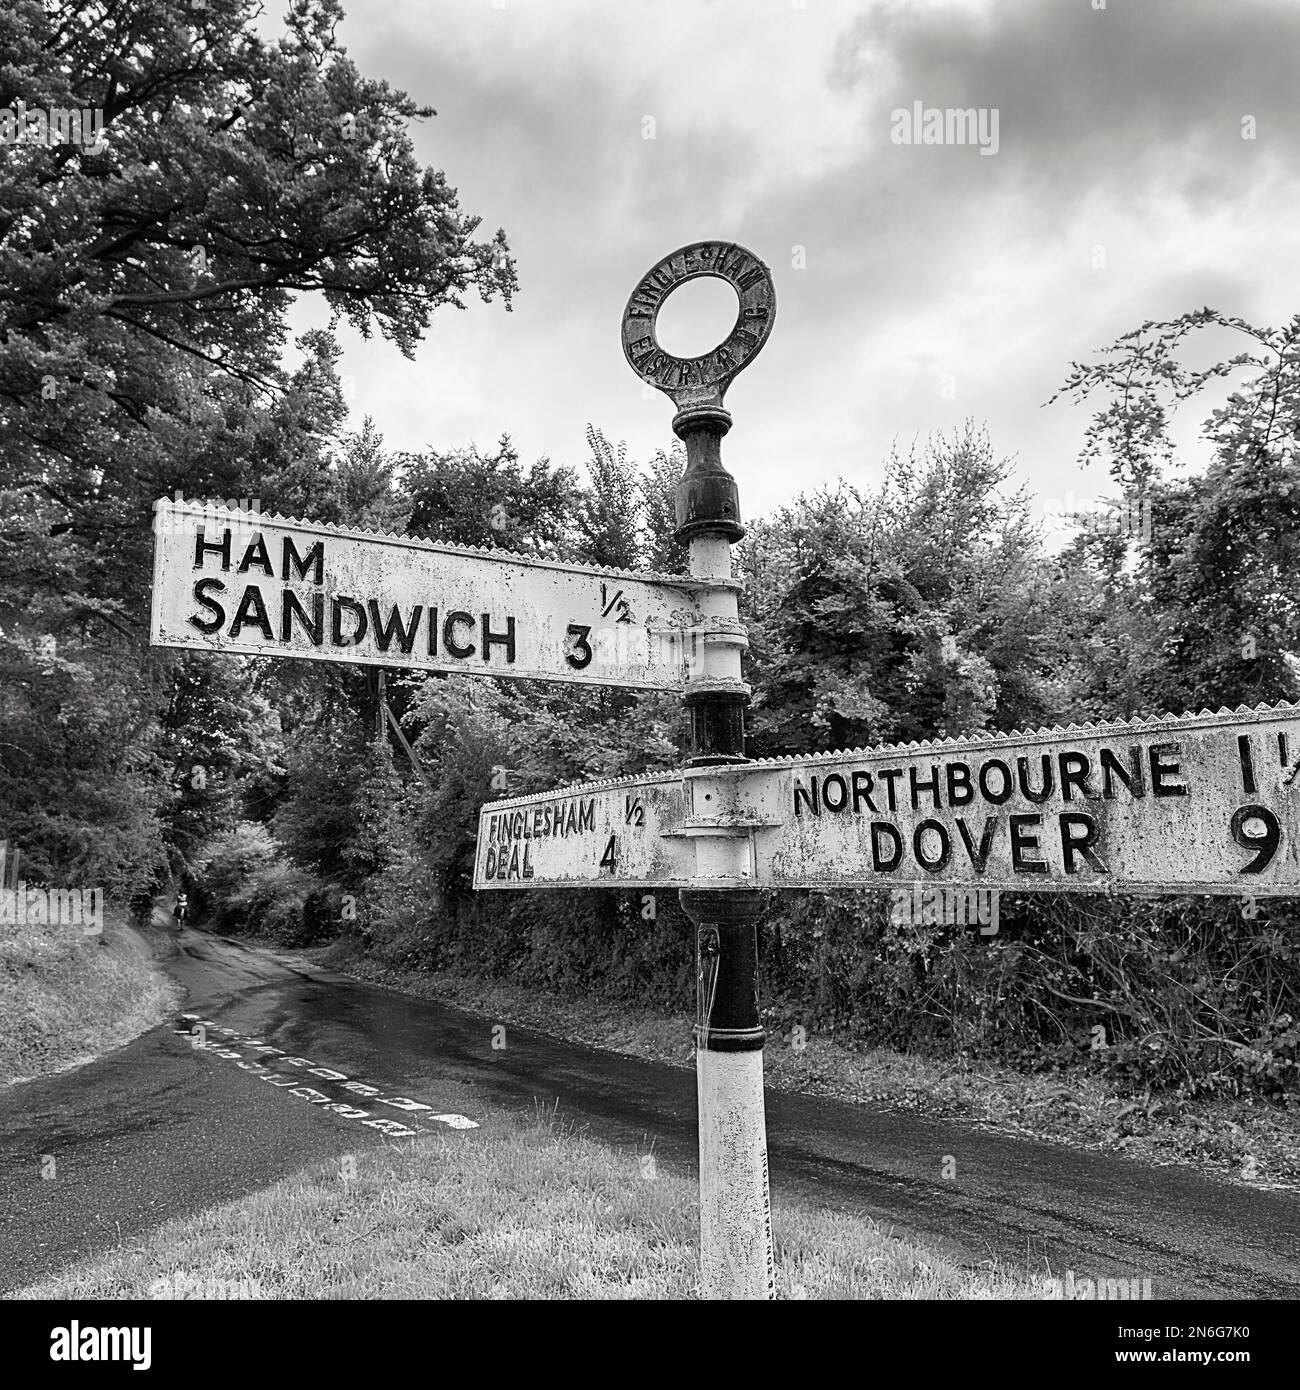 Old signs show direction and distance to Ham and Sandwich, dreary weather, Northbourne, Kent, Dover, England, United Kingdom Stock Photo